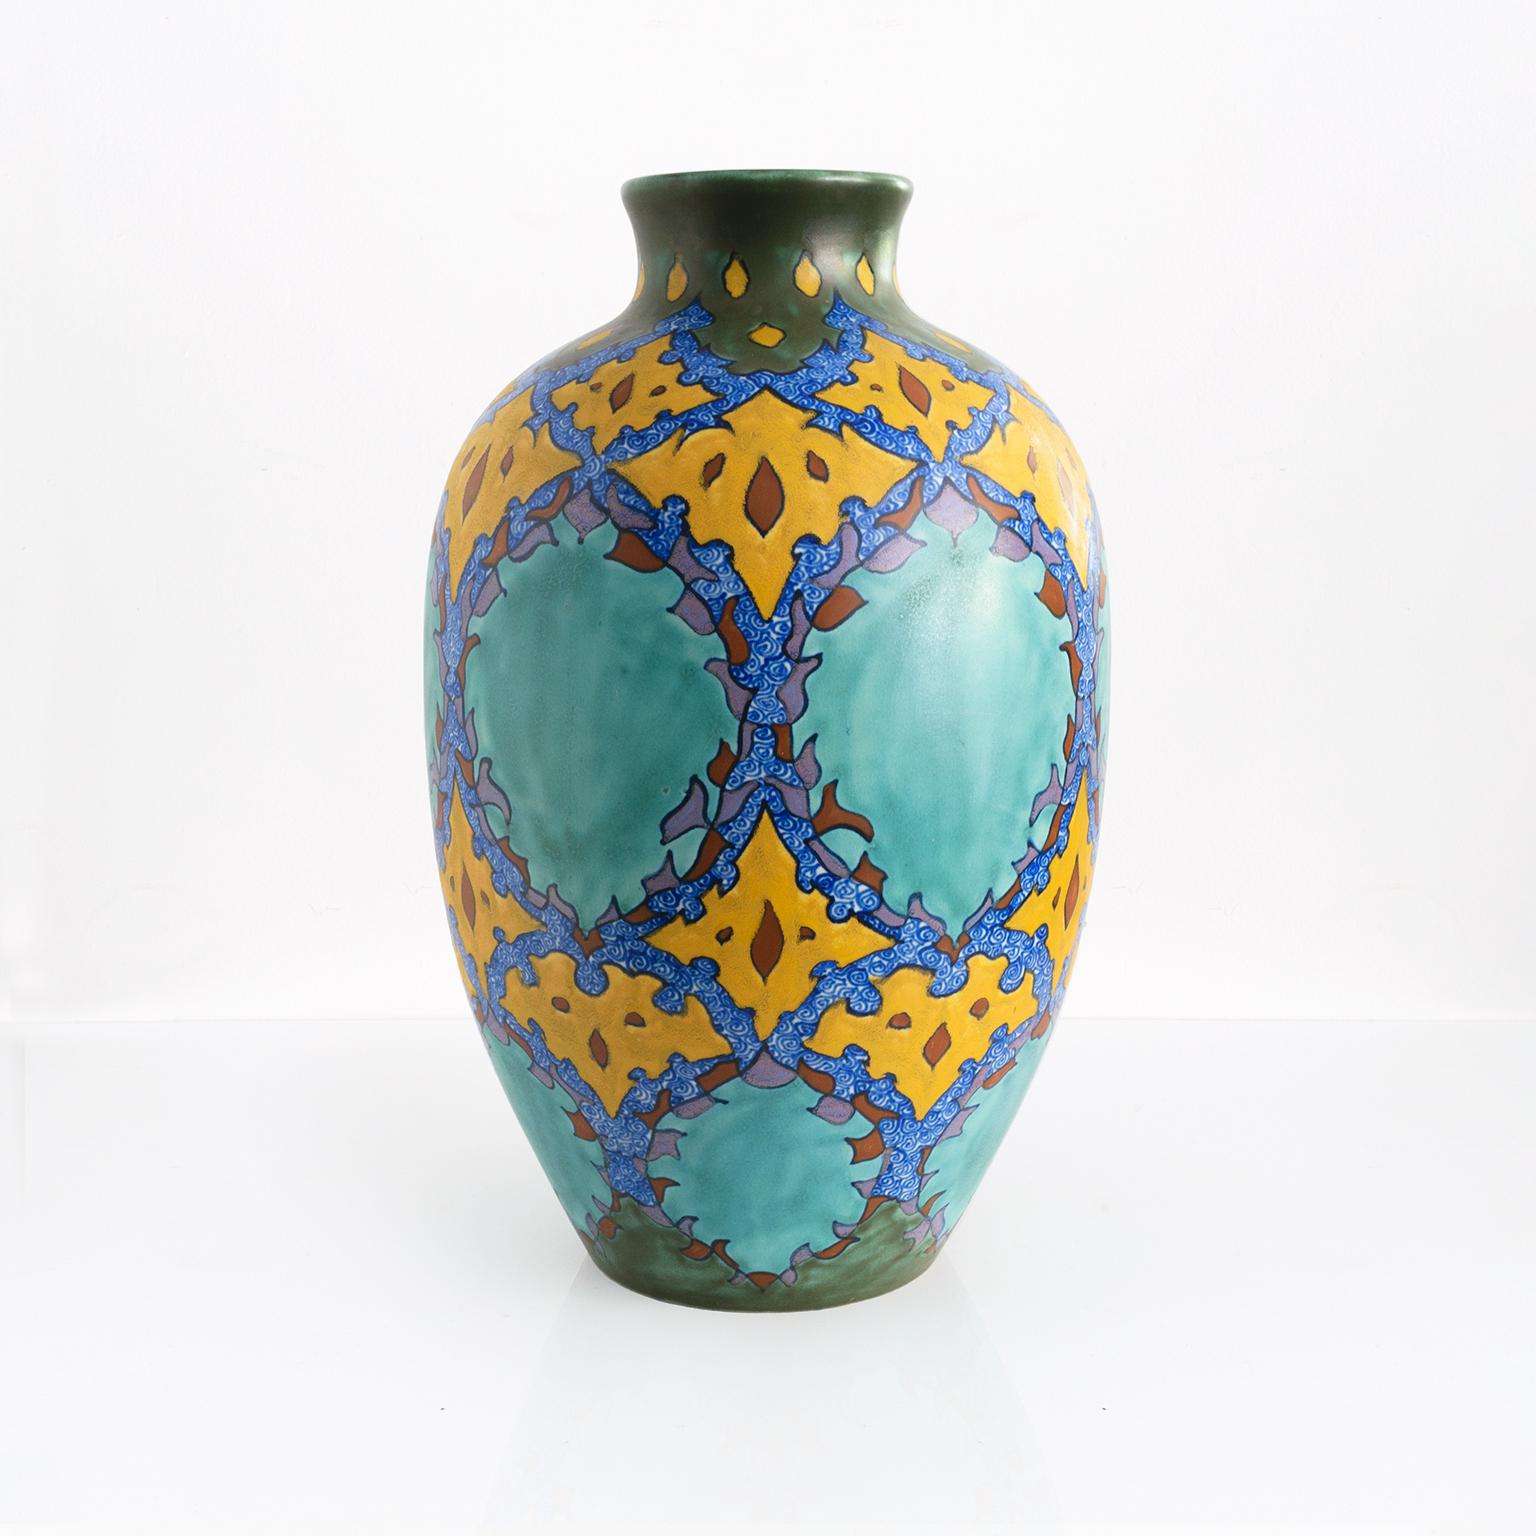 A large, brilliantly decorated ceramic vase for early 20th century. Signed on the bottom “Virginia”, made in Gouda, Holland. 

Measures: height: 17.75” diameter: 11”.